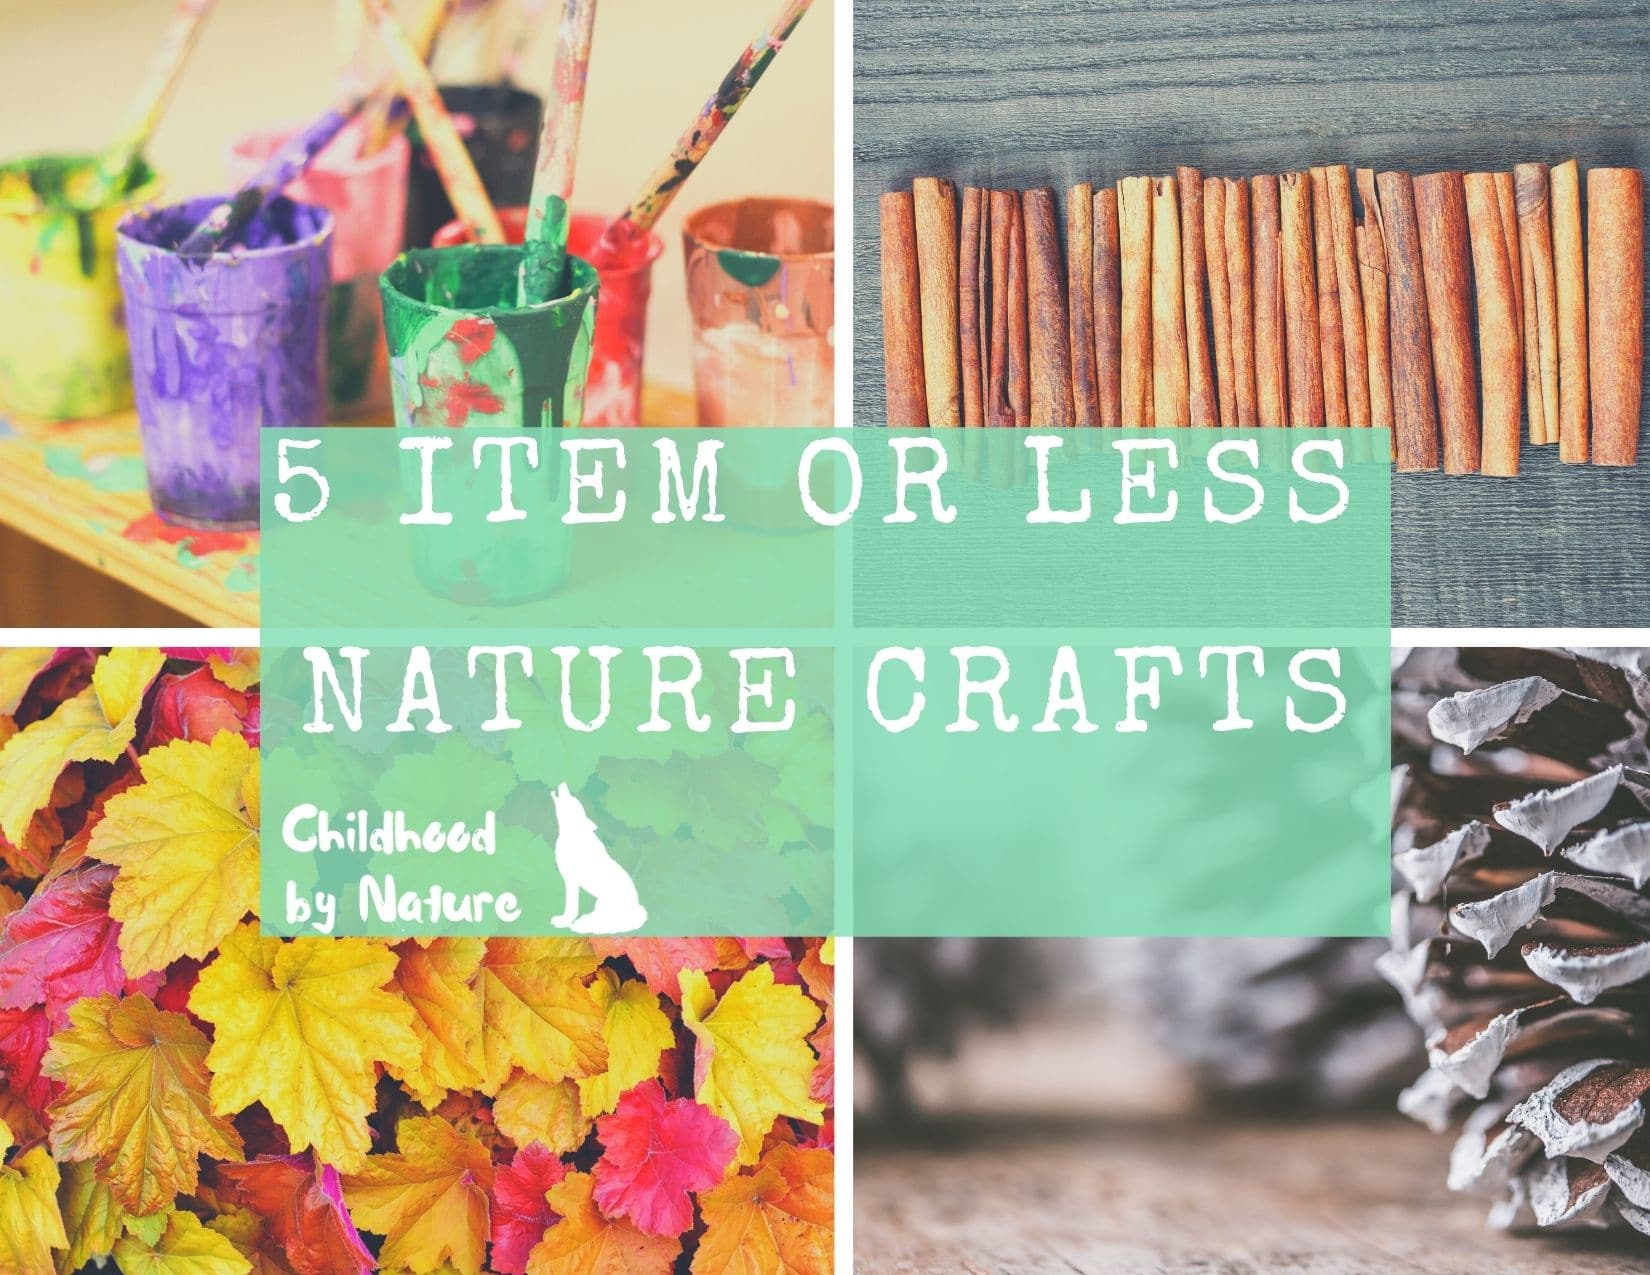 5 Item or Less Nature Crafts - Childhood By Nature